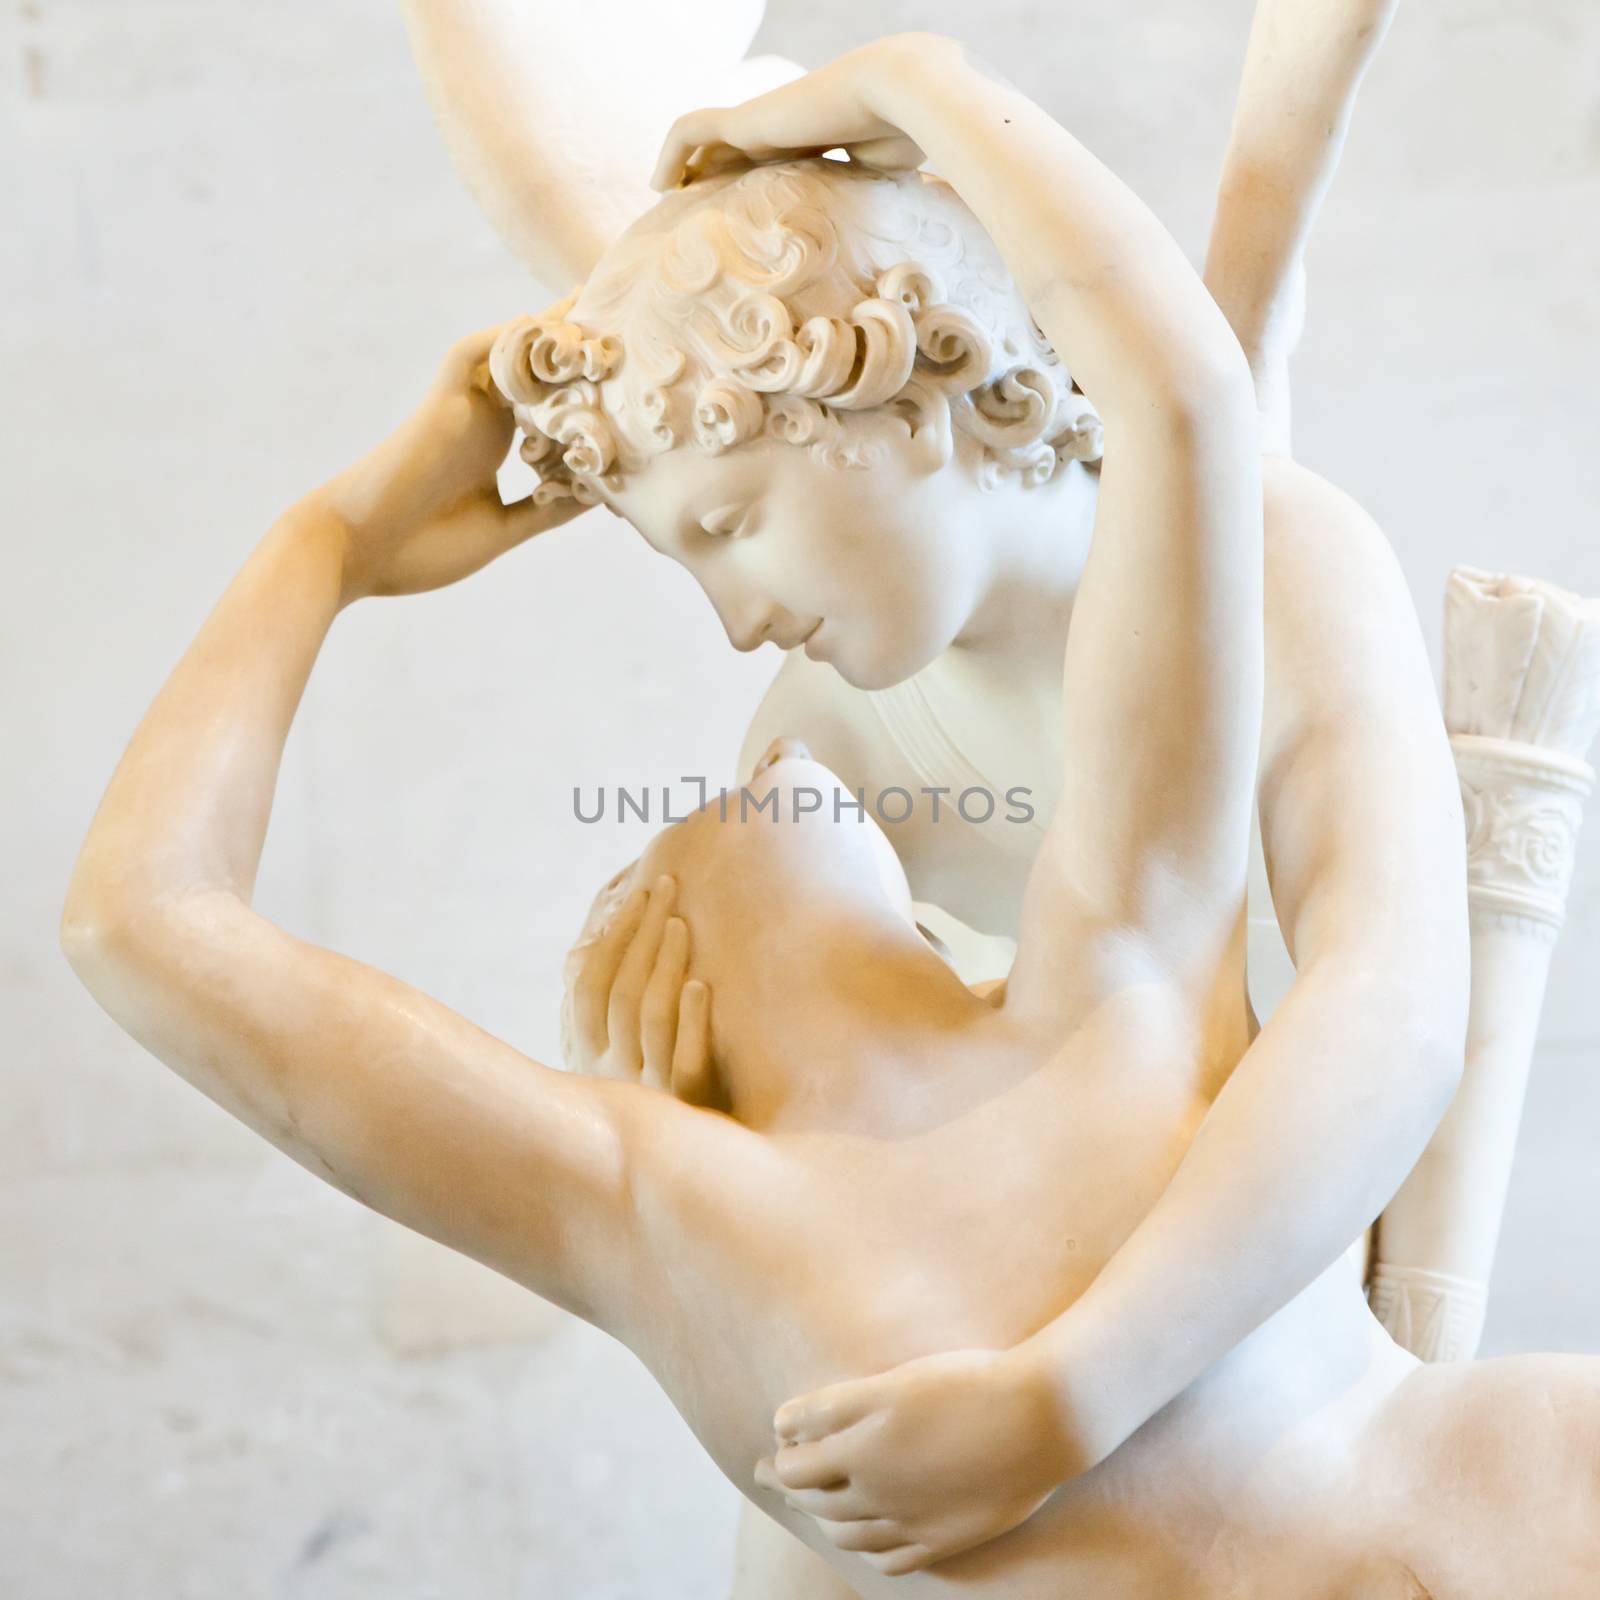 Antonio Canova's statue Psyche Revived by Cupid's Kiss, first commissioned in 1787, exemplifies the Neoclassical devotion to love and emotion